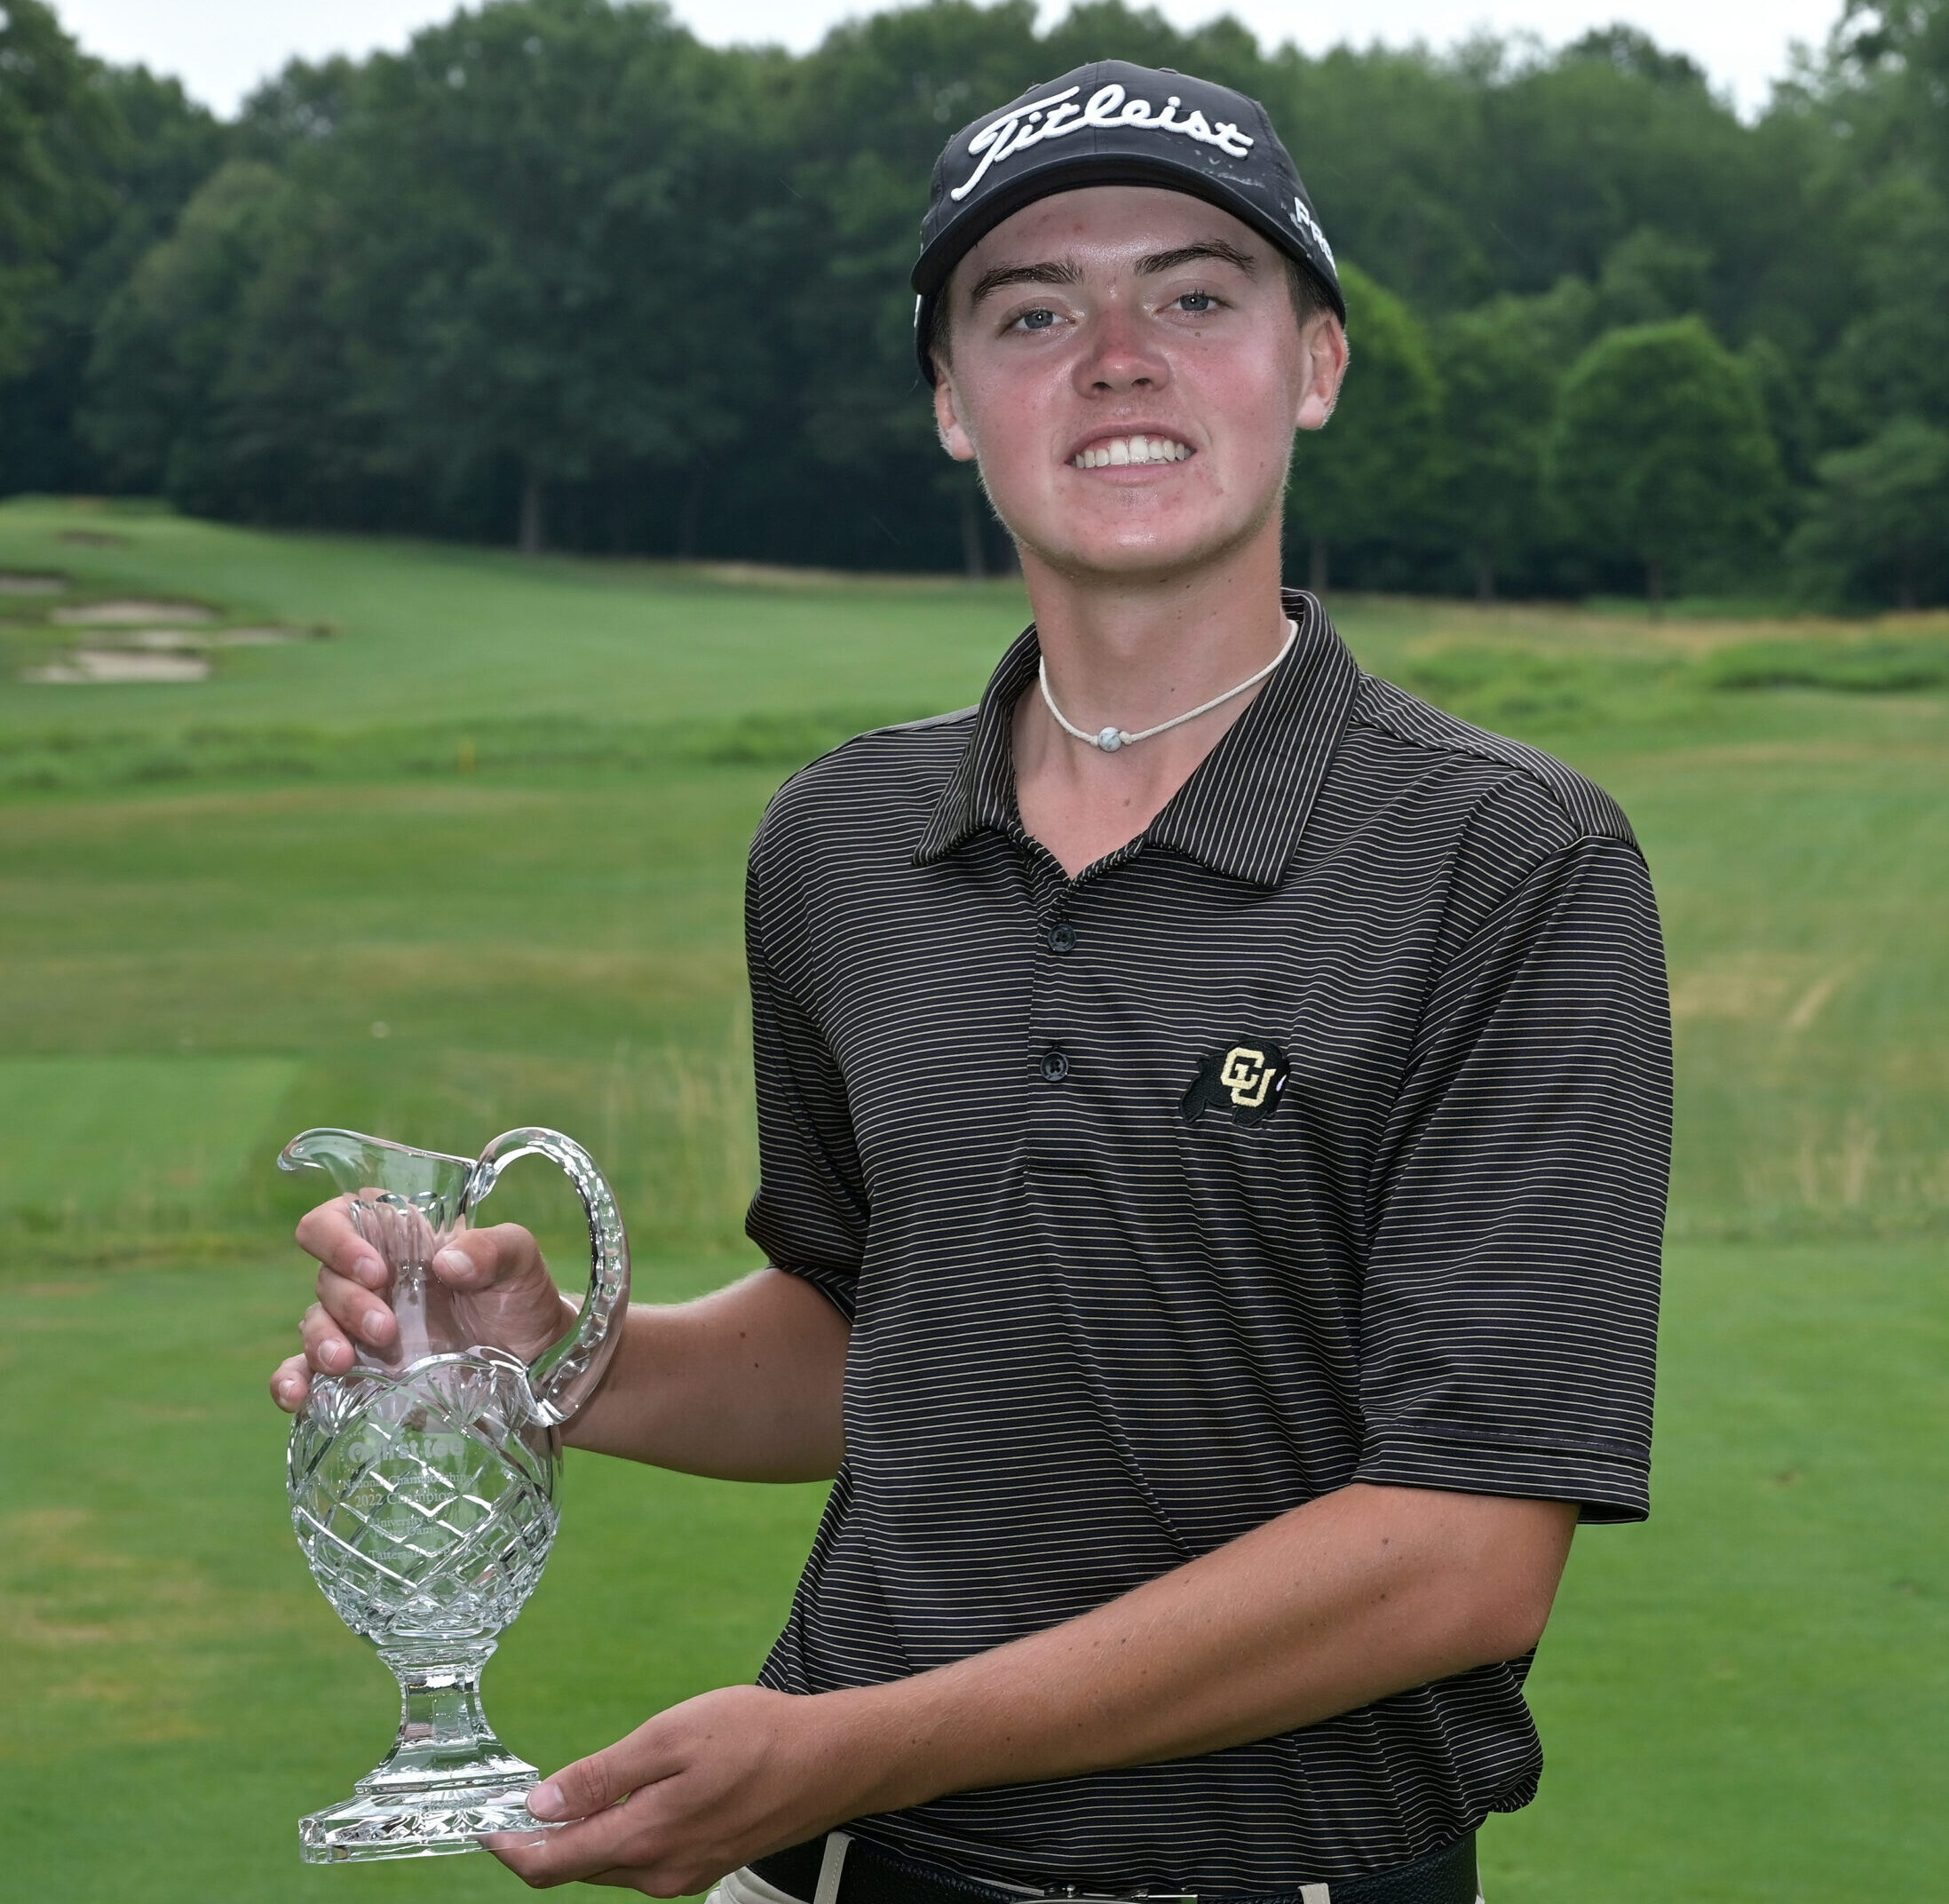 Hunter Swanson, winner of the boys division at the 2022 First Tee National Championship.